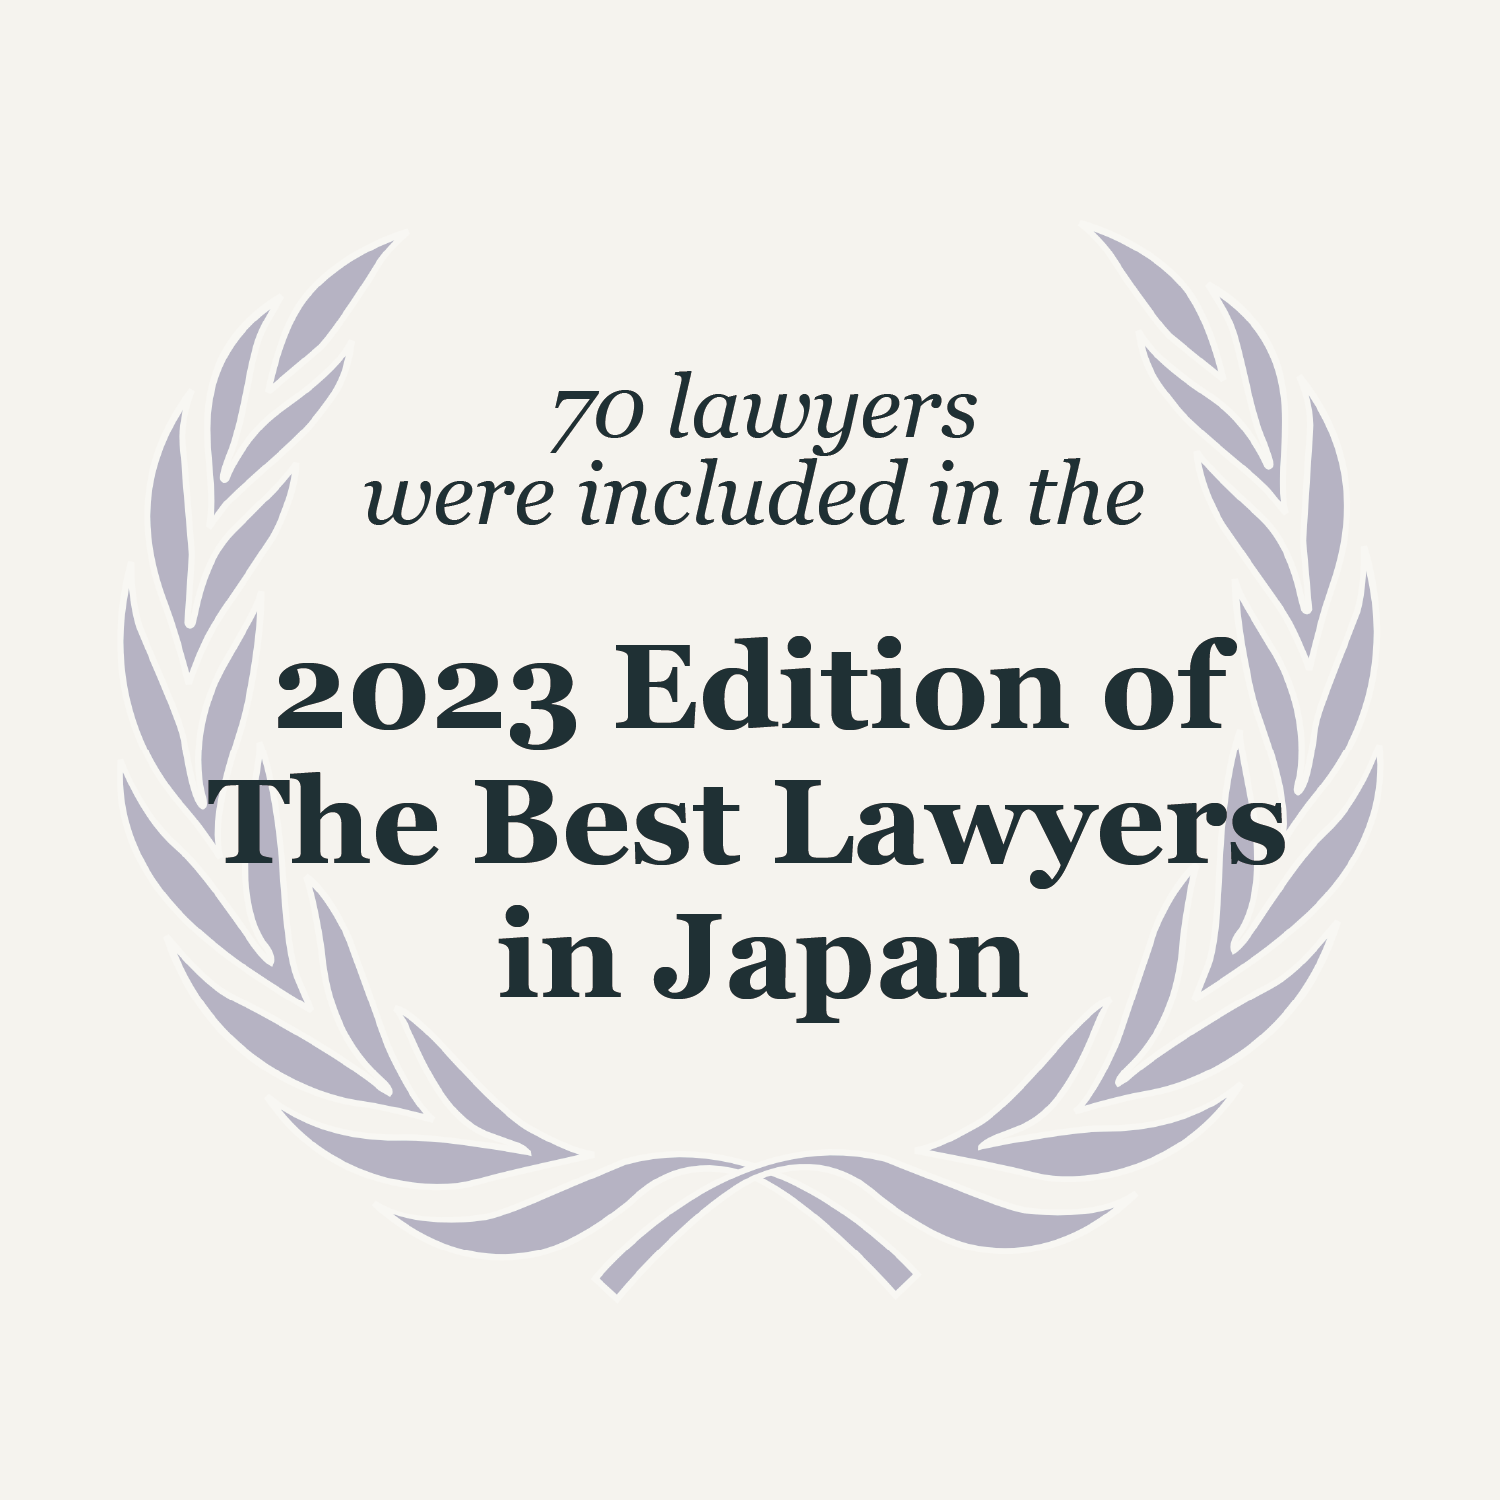 The 2023 edition of The Best Lawyers in Japan